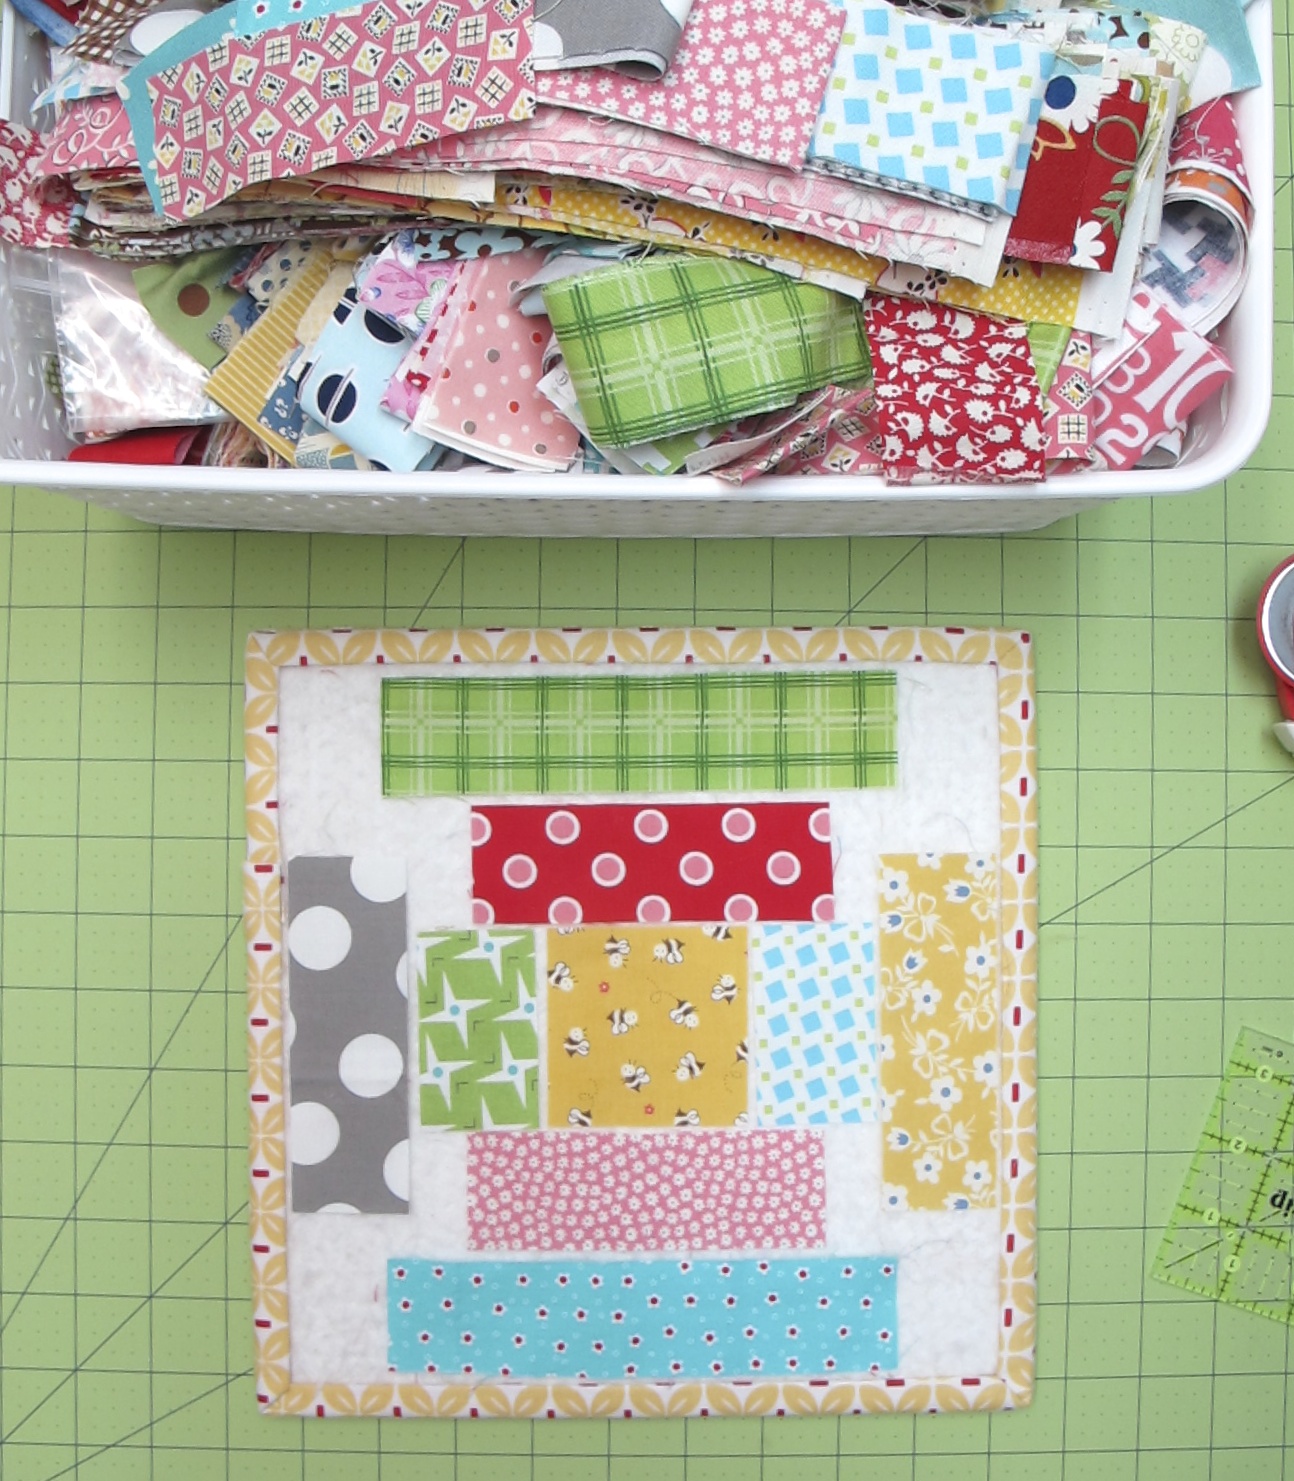 Scrappy Quilted Patchwork Pillows